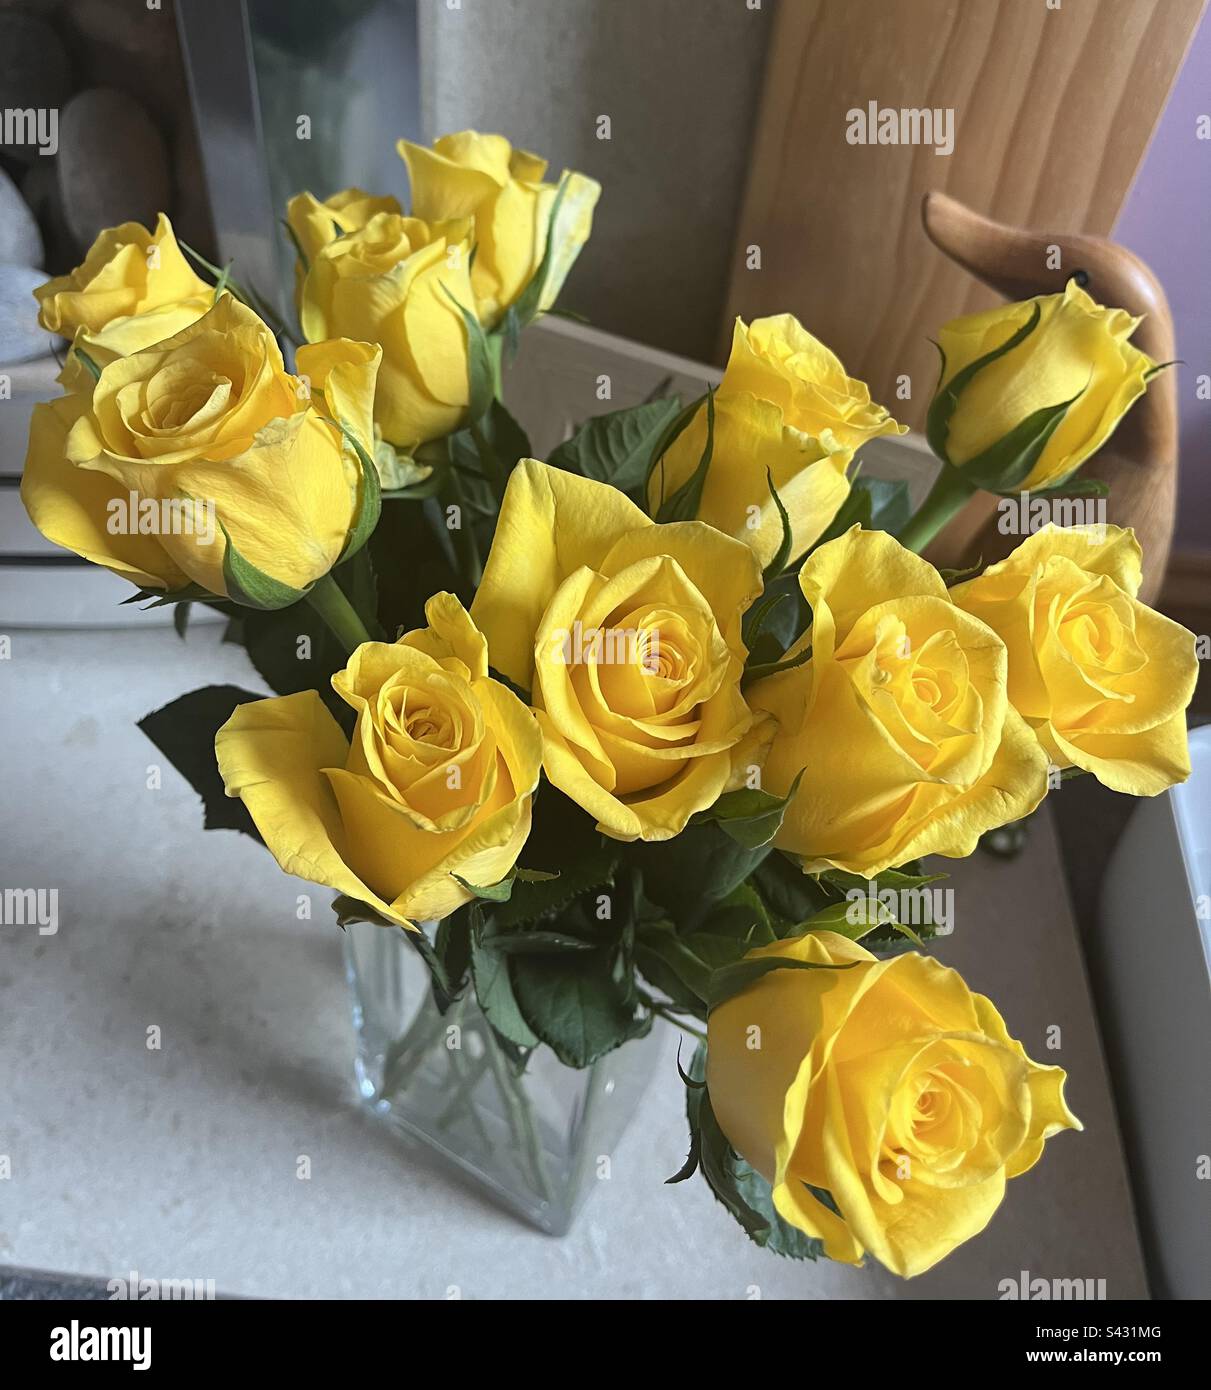 Yellow roses from a friend Stock Photo